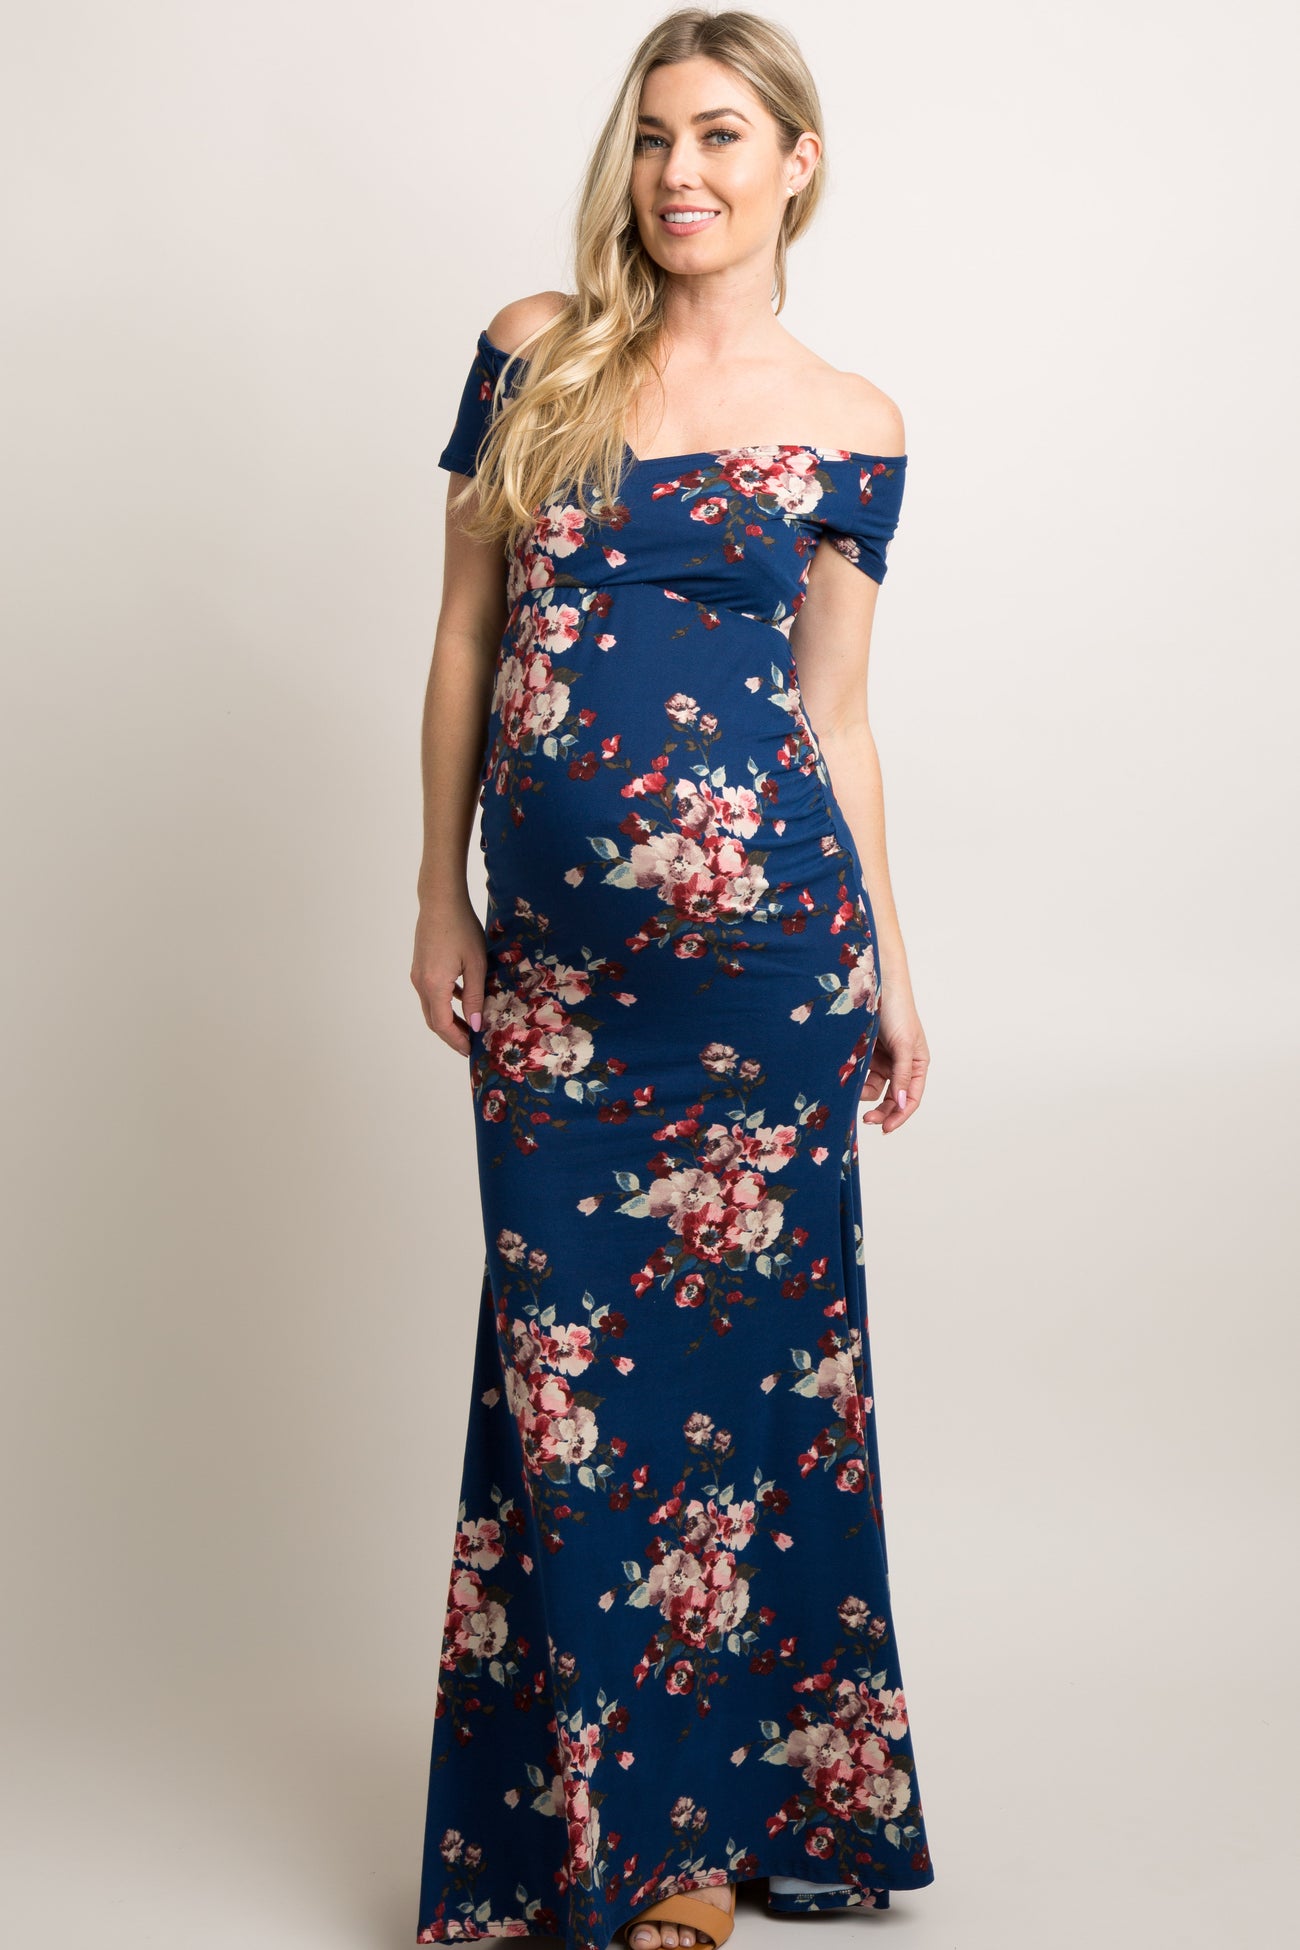 Navy Floral Off Shoulder Wrap Maternity Photoshoot Gown/Dress – PinkBlush